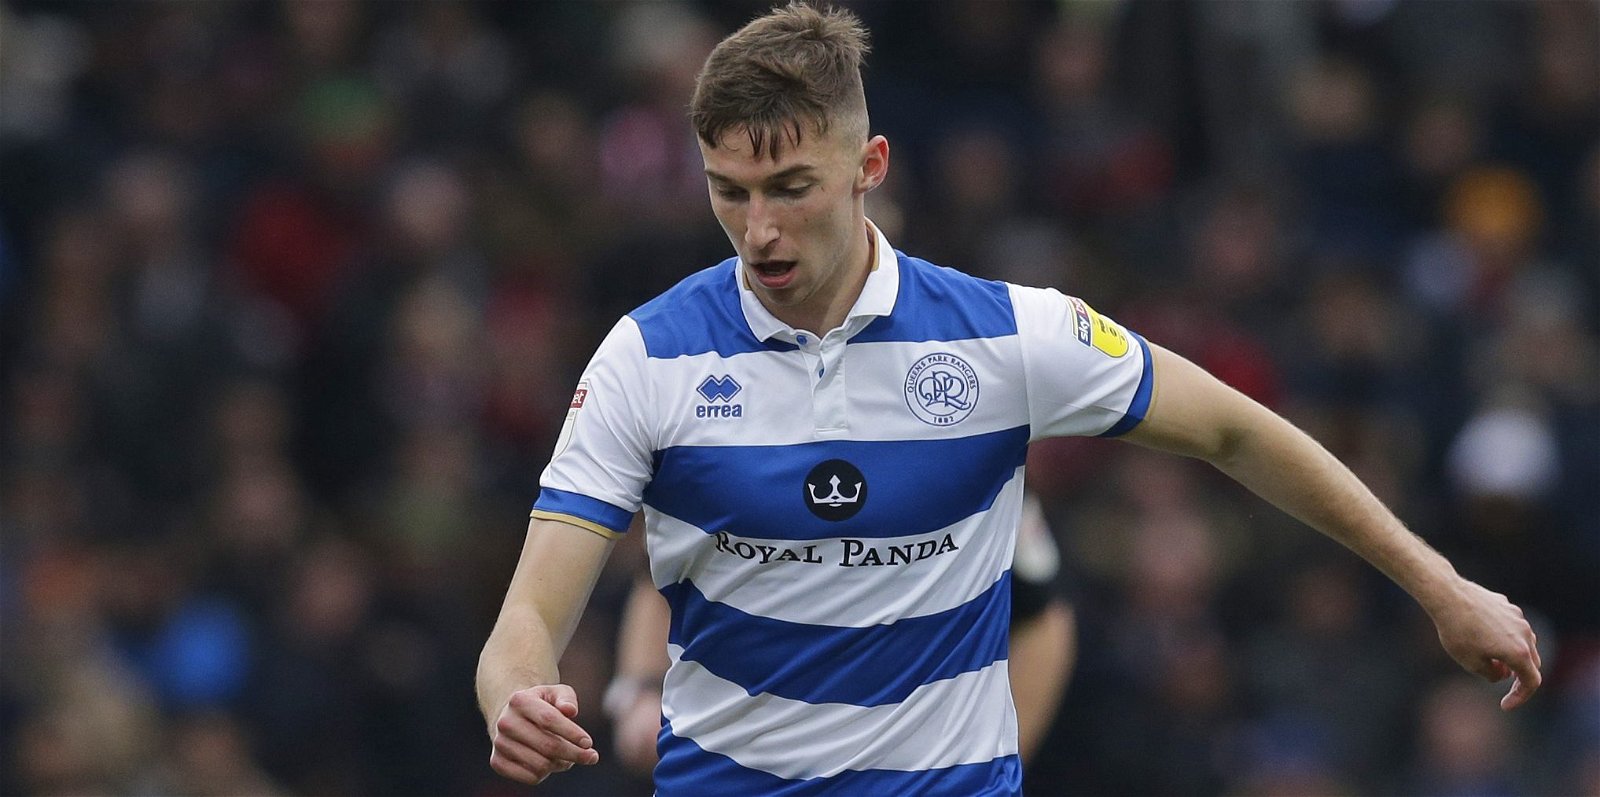 QPR, QPR will offload 2019 signing if they sign a centre-back this week